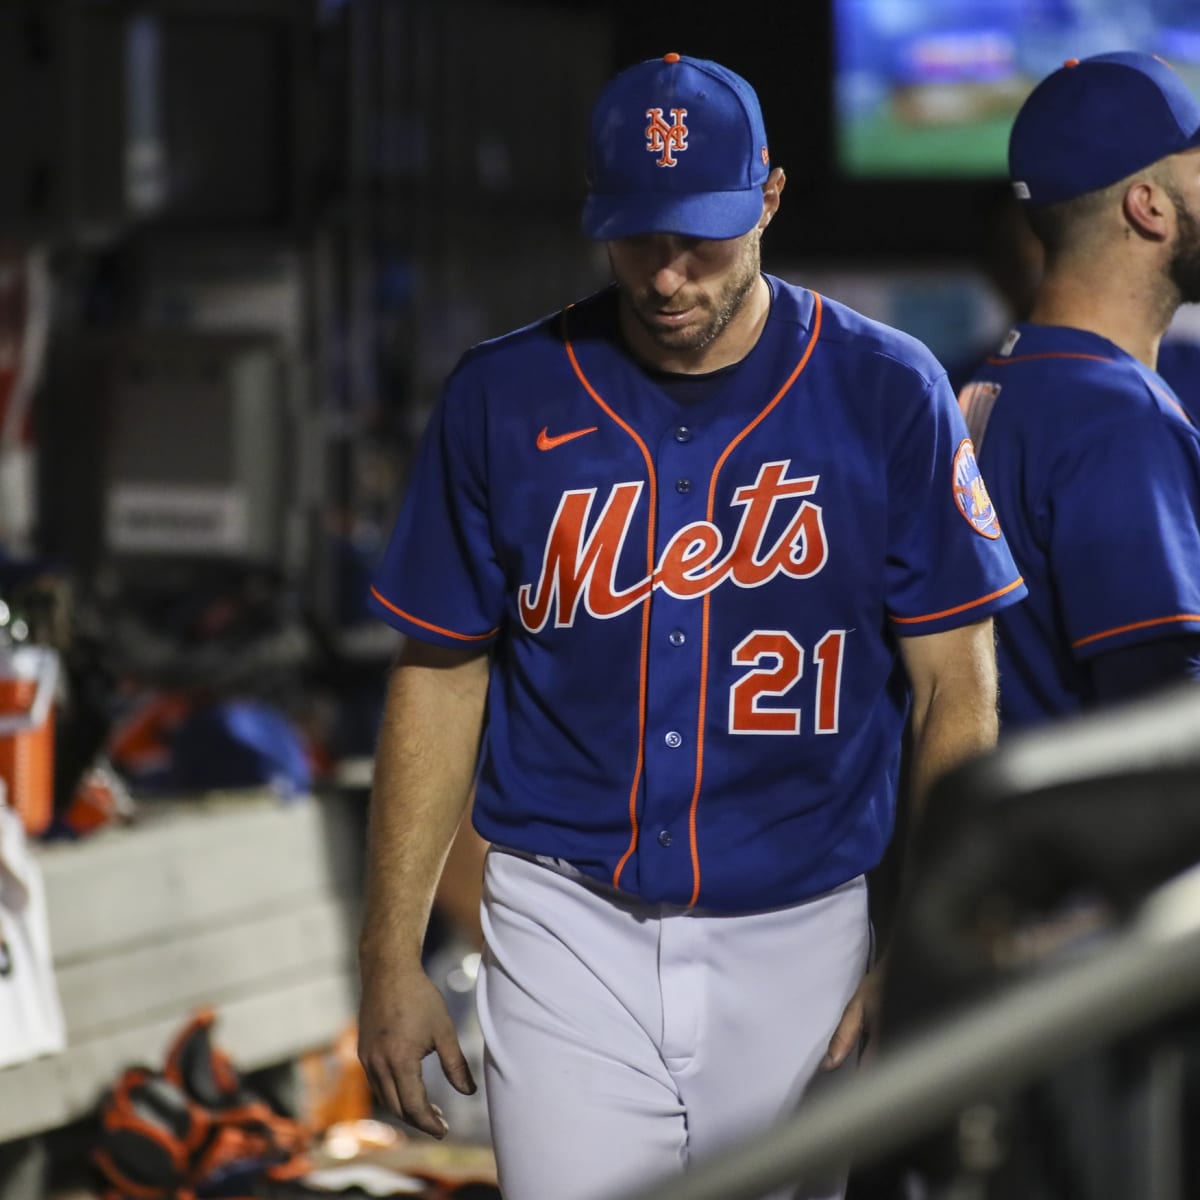 New Era For The New York Mets May Have History On Its Side